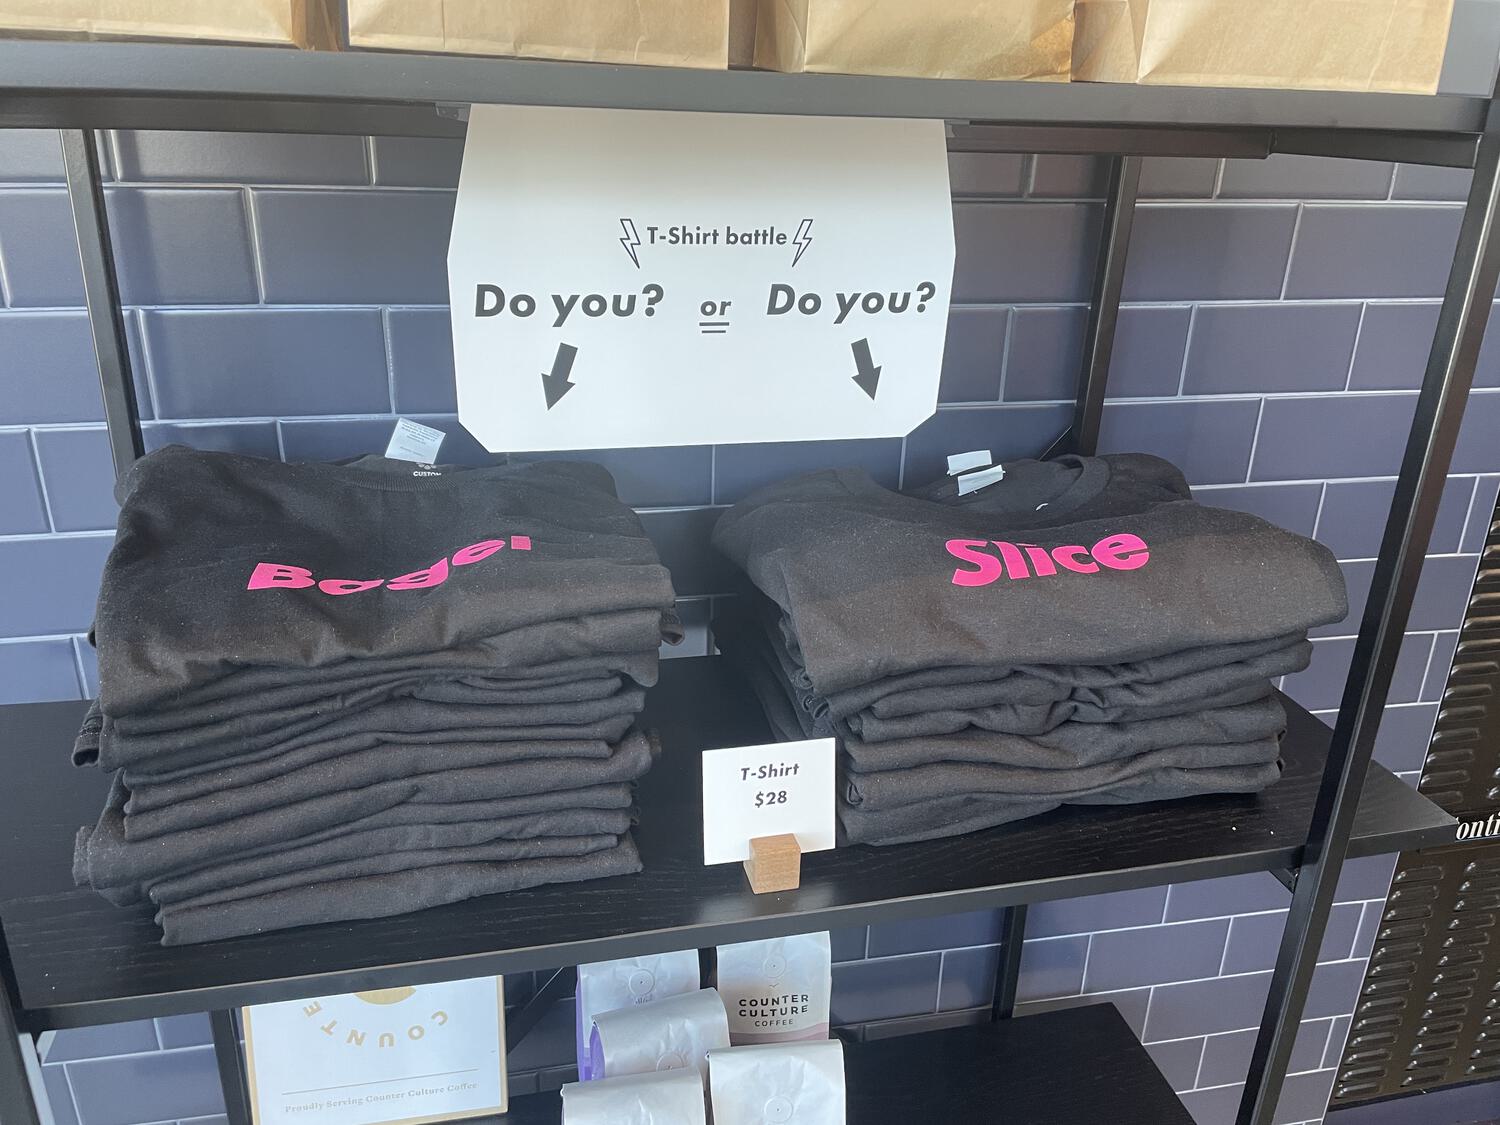 Two piles of t-shirts for sale, one printed with "Bagel" and the other printed with "Slice." Above them is a sign that reads "T-Shirt battle: do you? or do you?"